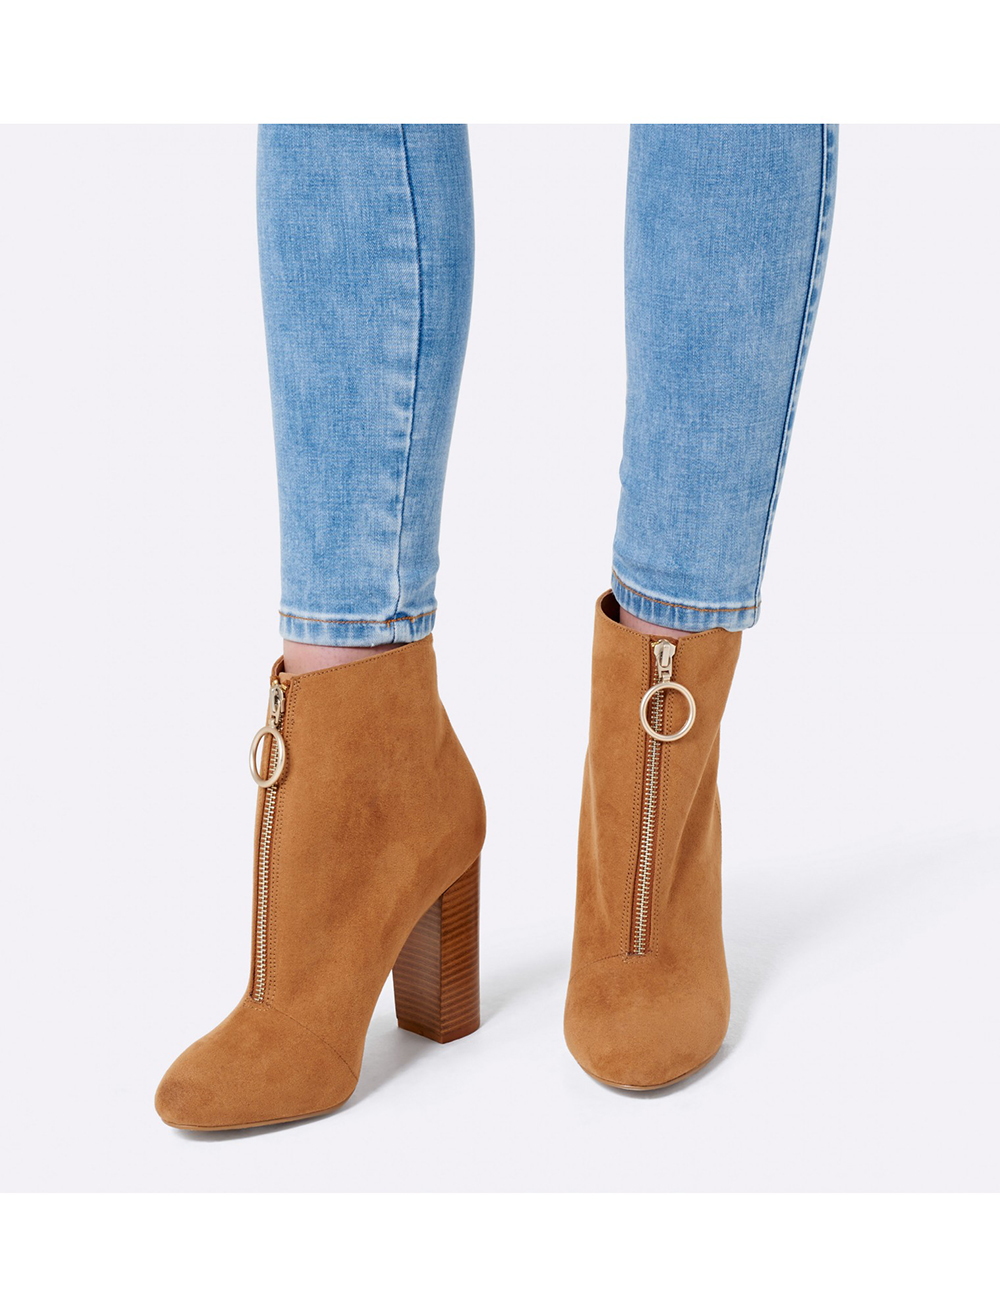 Forever New boots, $97